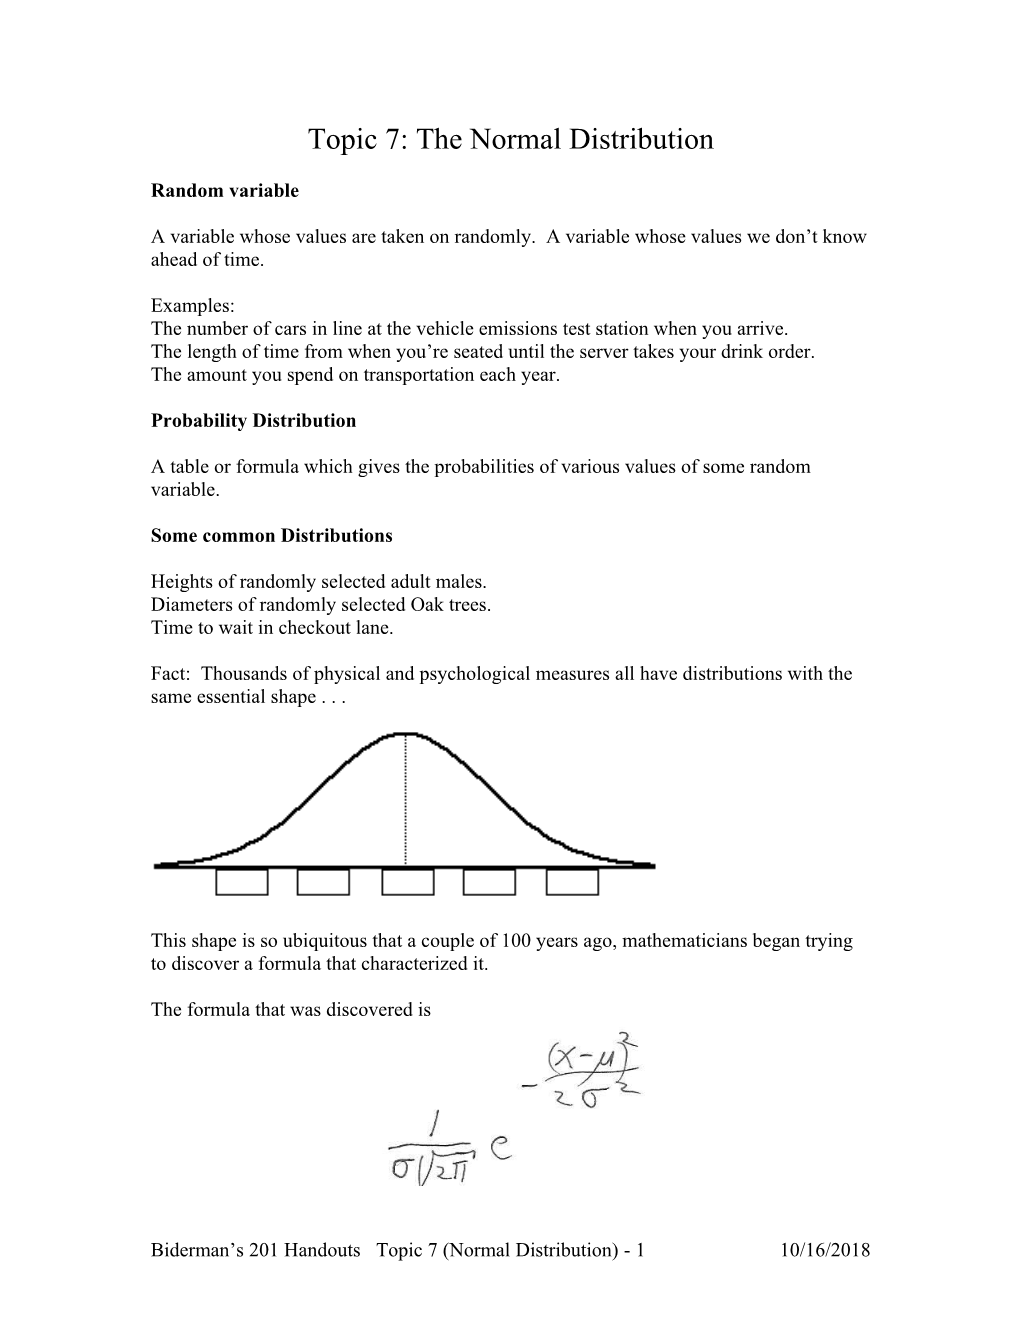 Normal Distribution In-Class Exercises